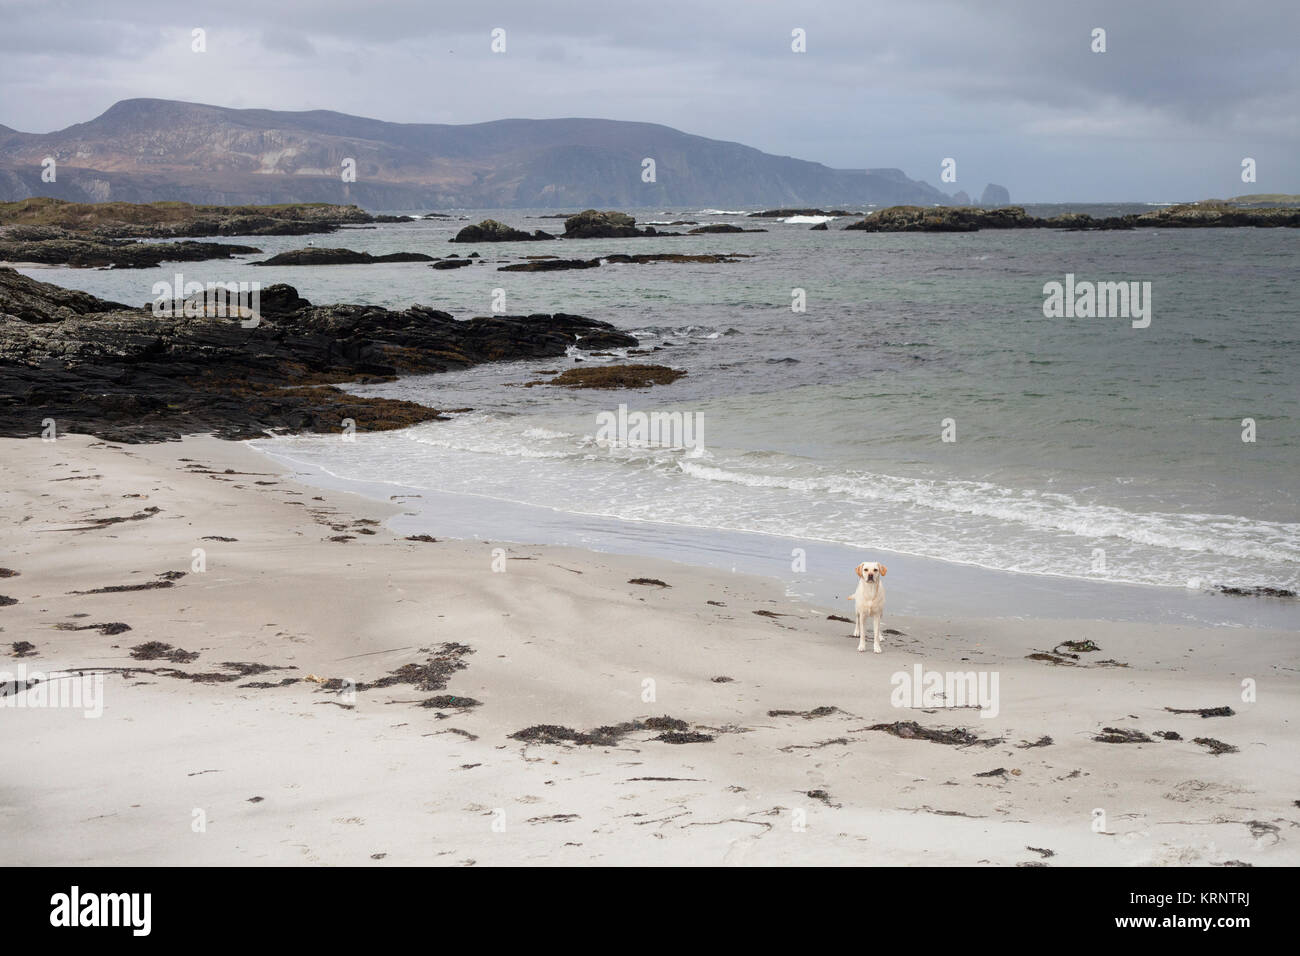 Travel and landscape photos fom Donegal, Irelands Stock Photo